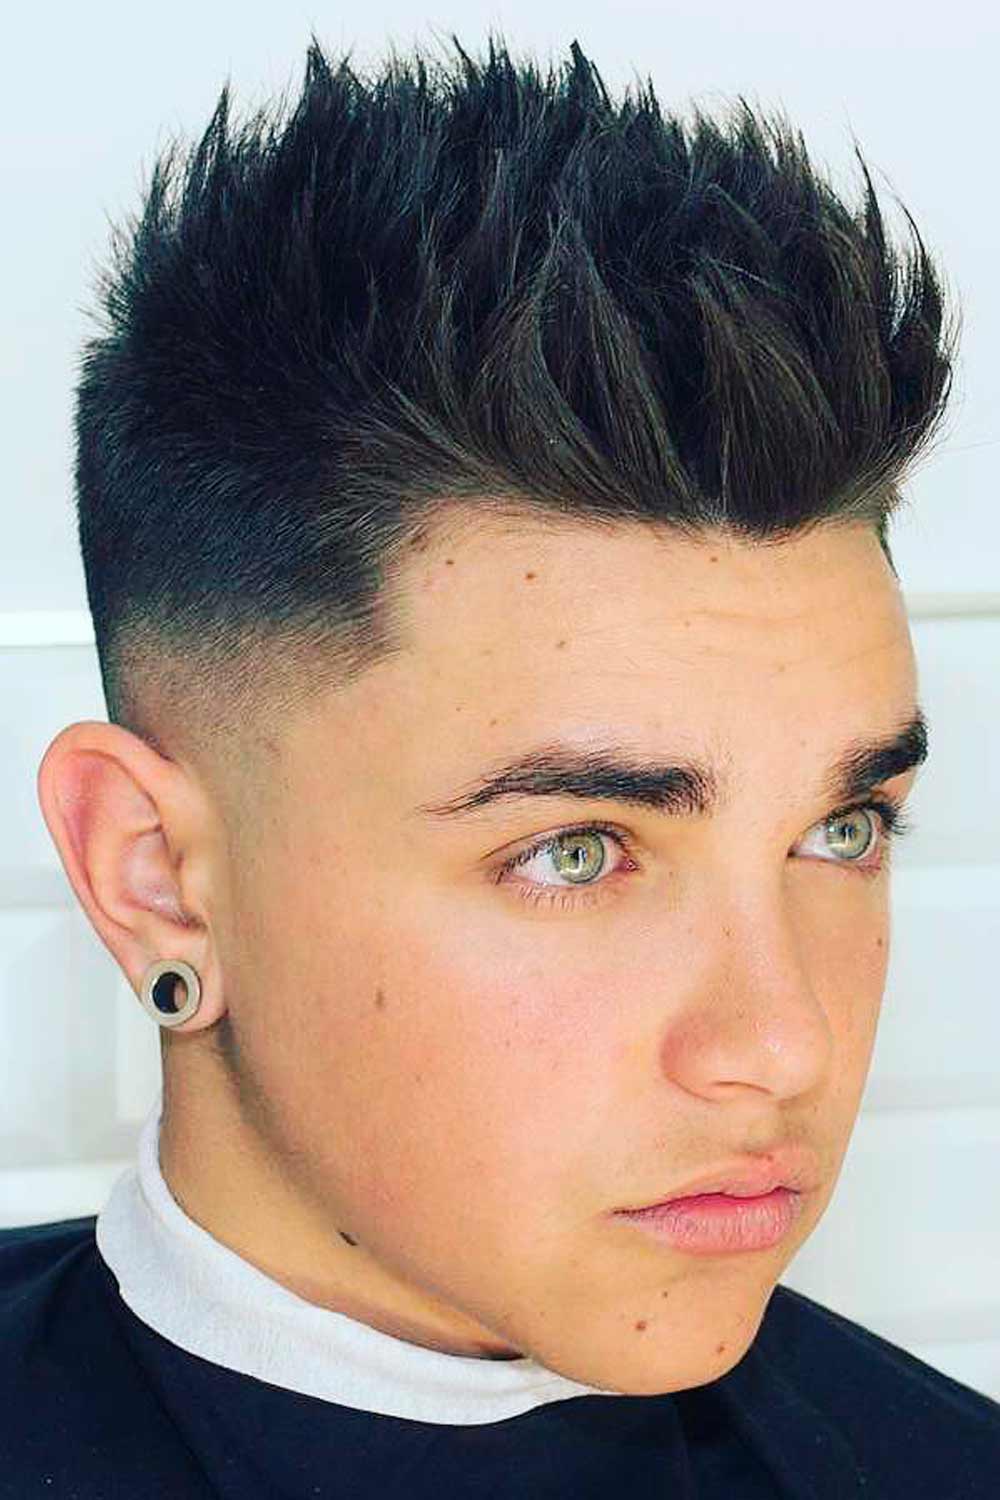 Two Block Haircut Ideas For Him To Try This Year - LoveHairStyles